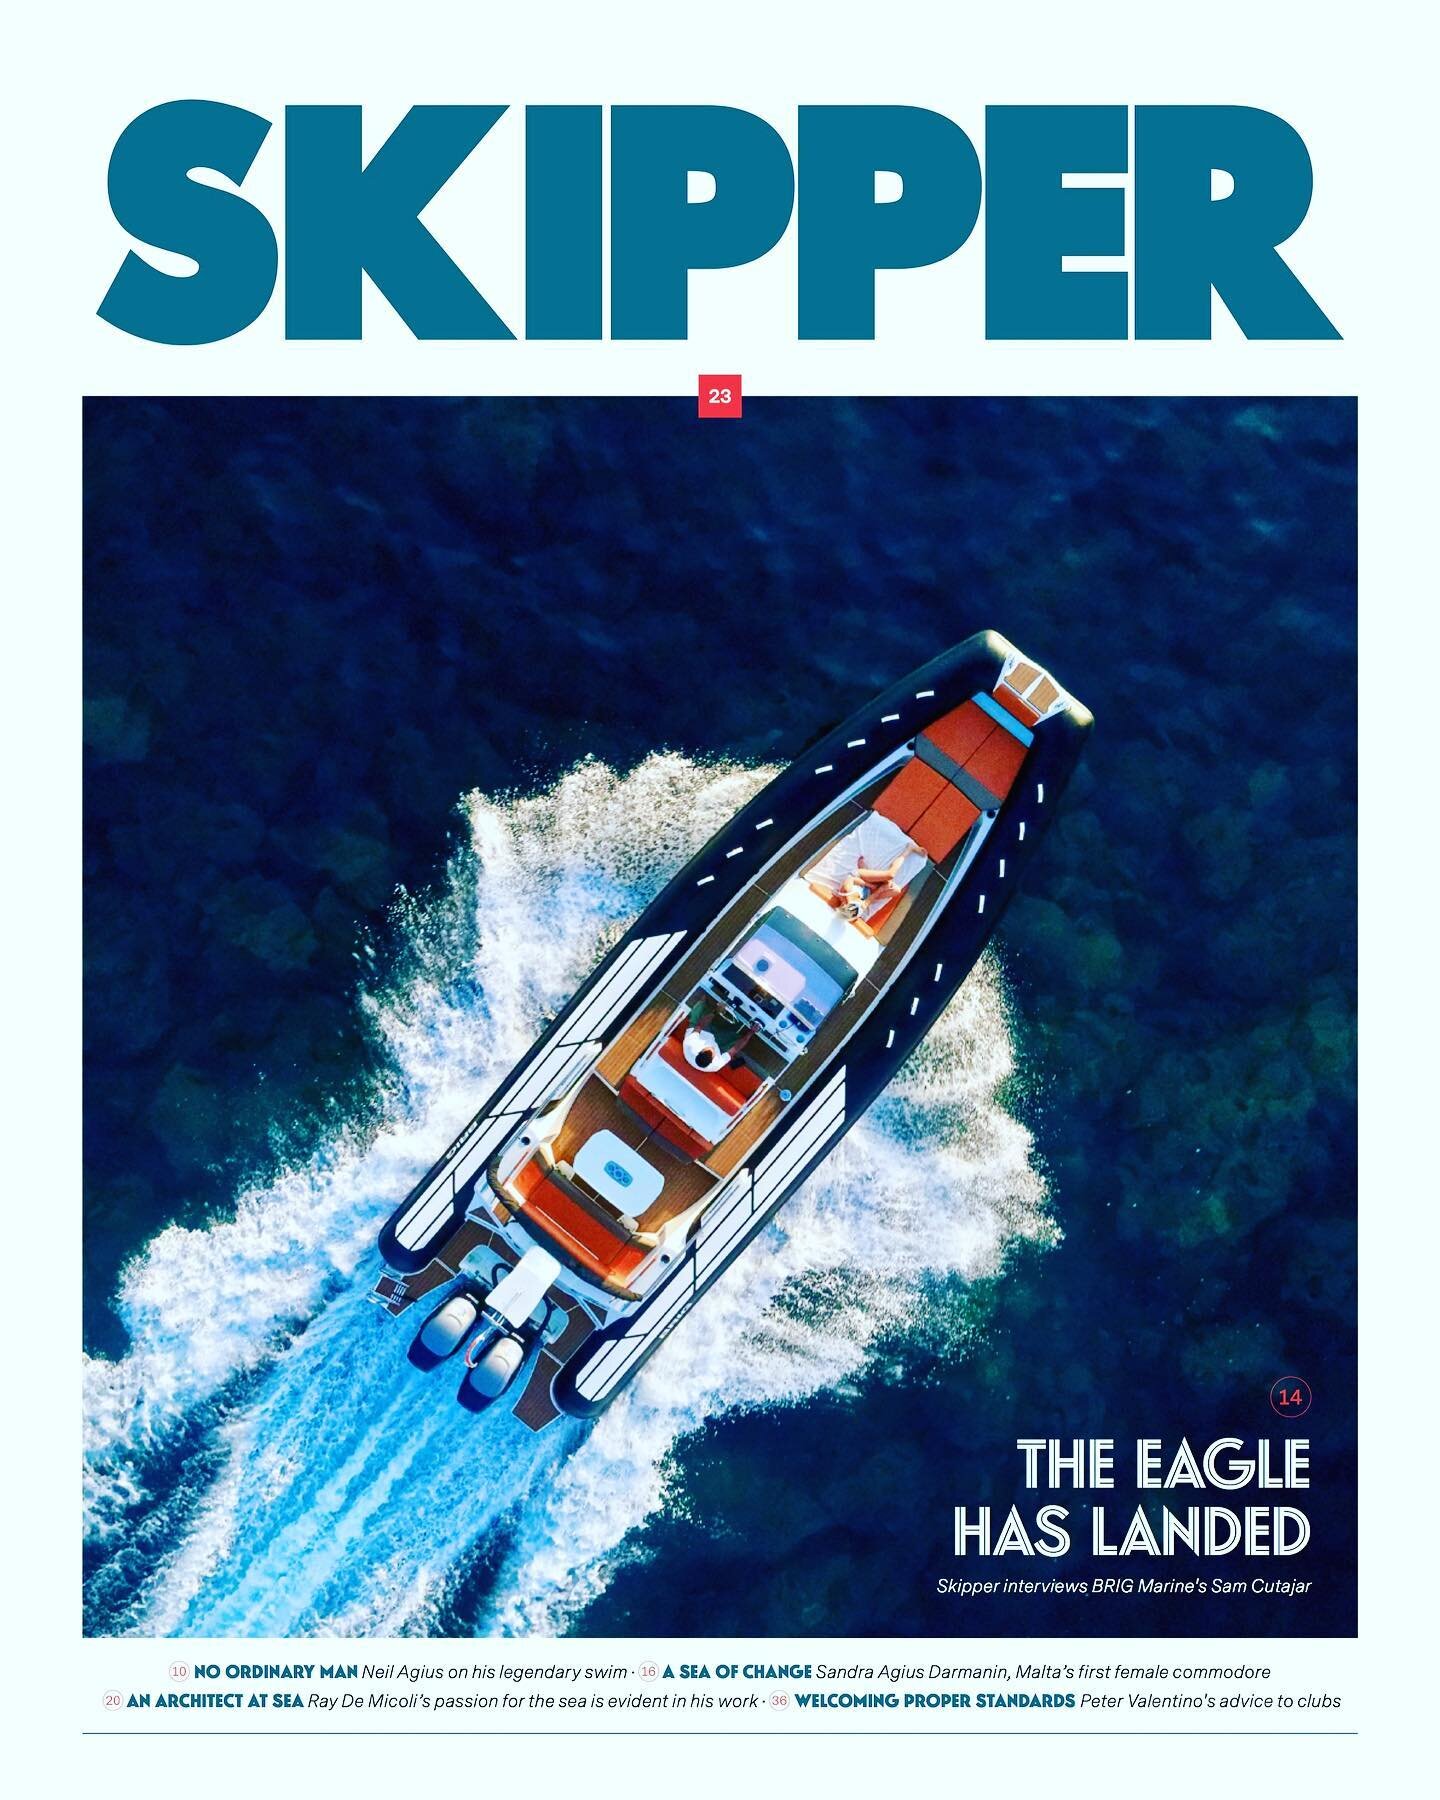 .
The summer edition is up and loaded. Be the first to read the online version! 🛥⚓️😎
.
.
Cover: The Eagle Has Landed [Brig Marine] p.14 / 📷 Kurt Arrigo
.
🖥📱 http://bit.ly/Skipper23
.
.
#skippermag #brigmarine #neilagius #firstfemalecommadore #ar